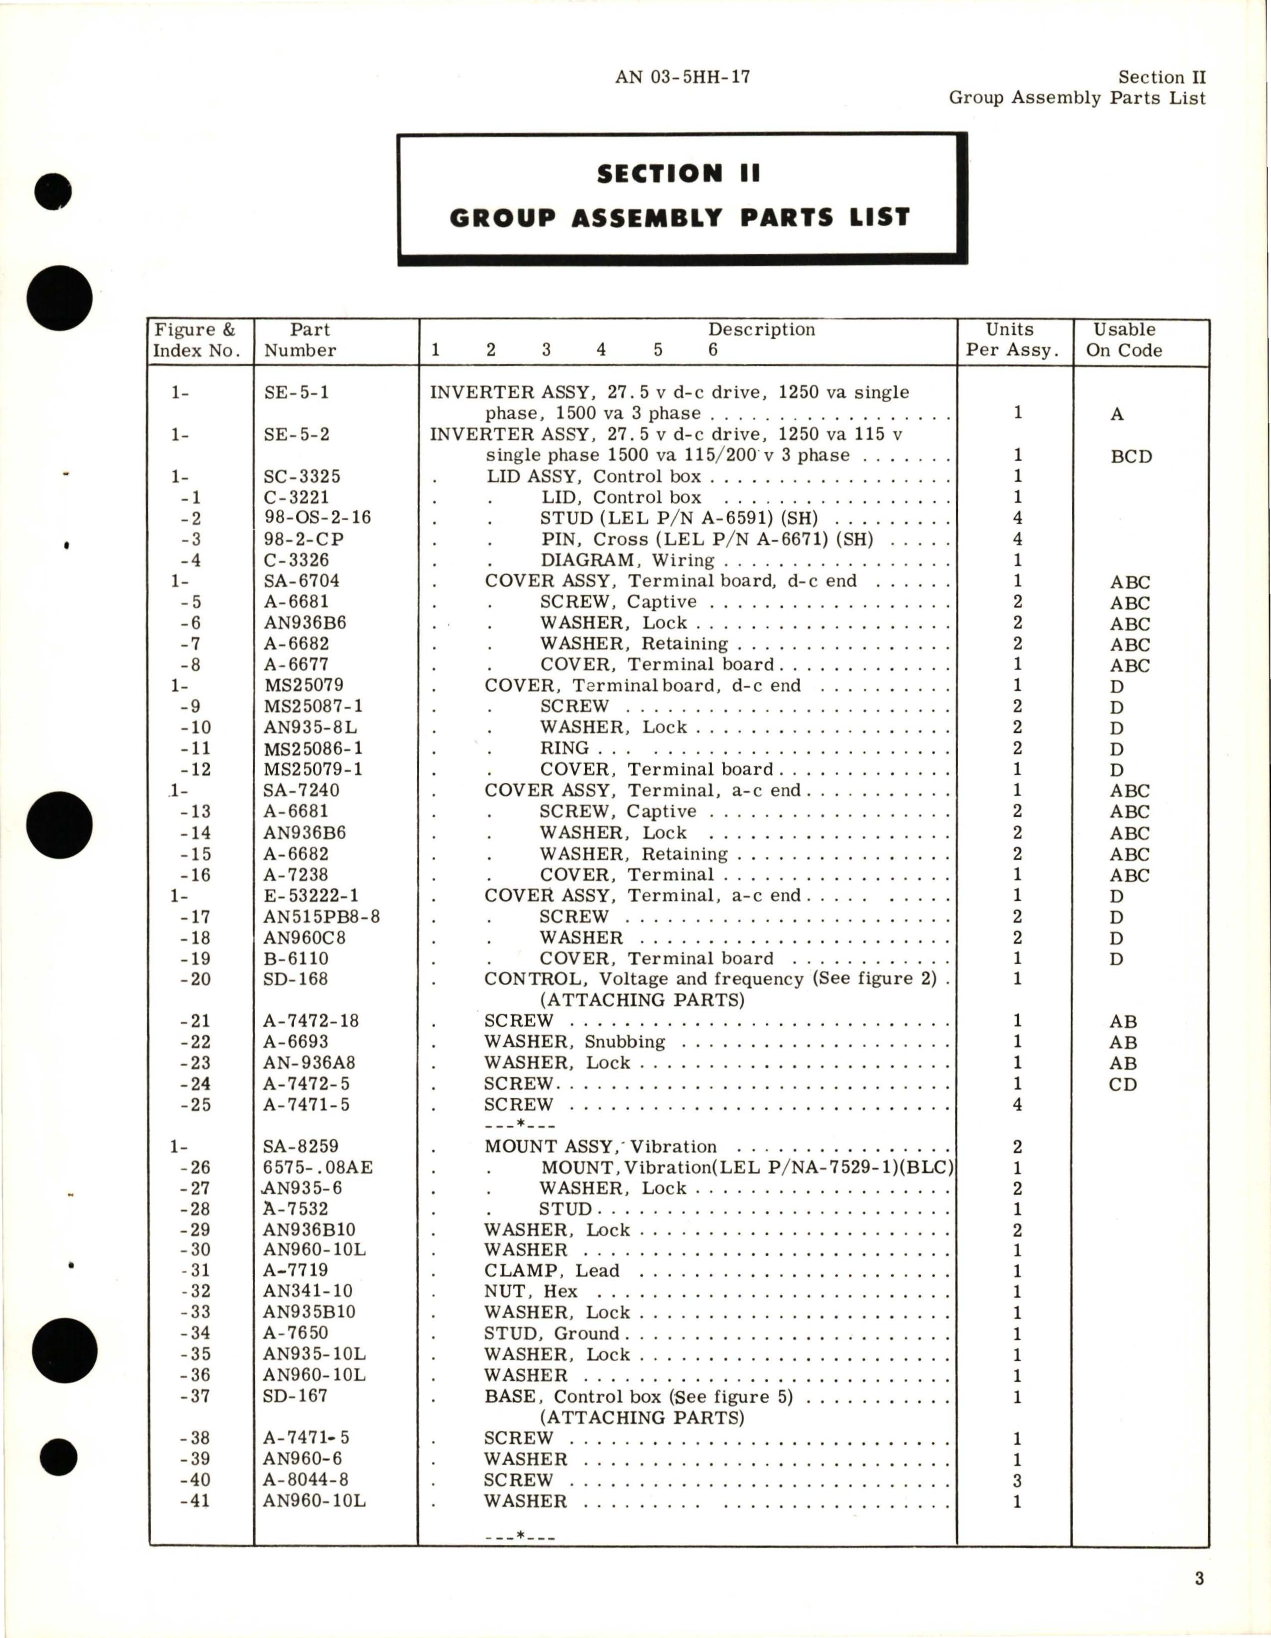 Sample page 7 from AirCorps Library document: Illustrated Parts Breakdown for Inverter - Parts SE-5-1 and SE-5-2